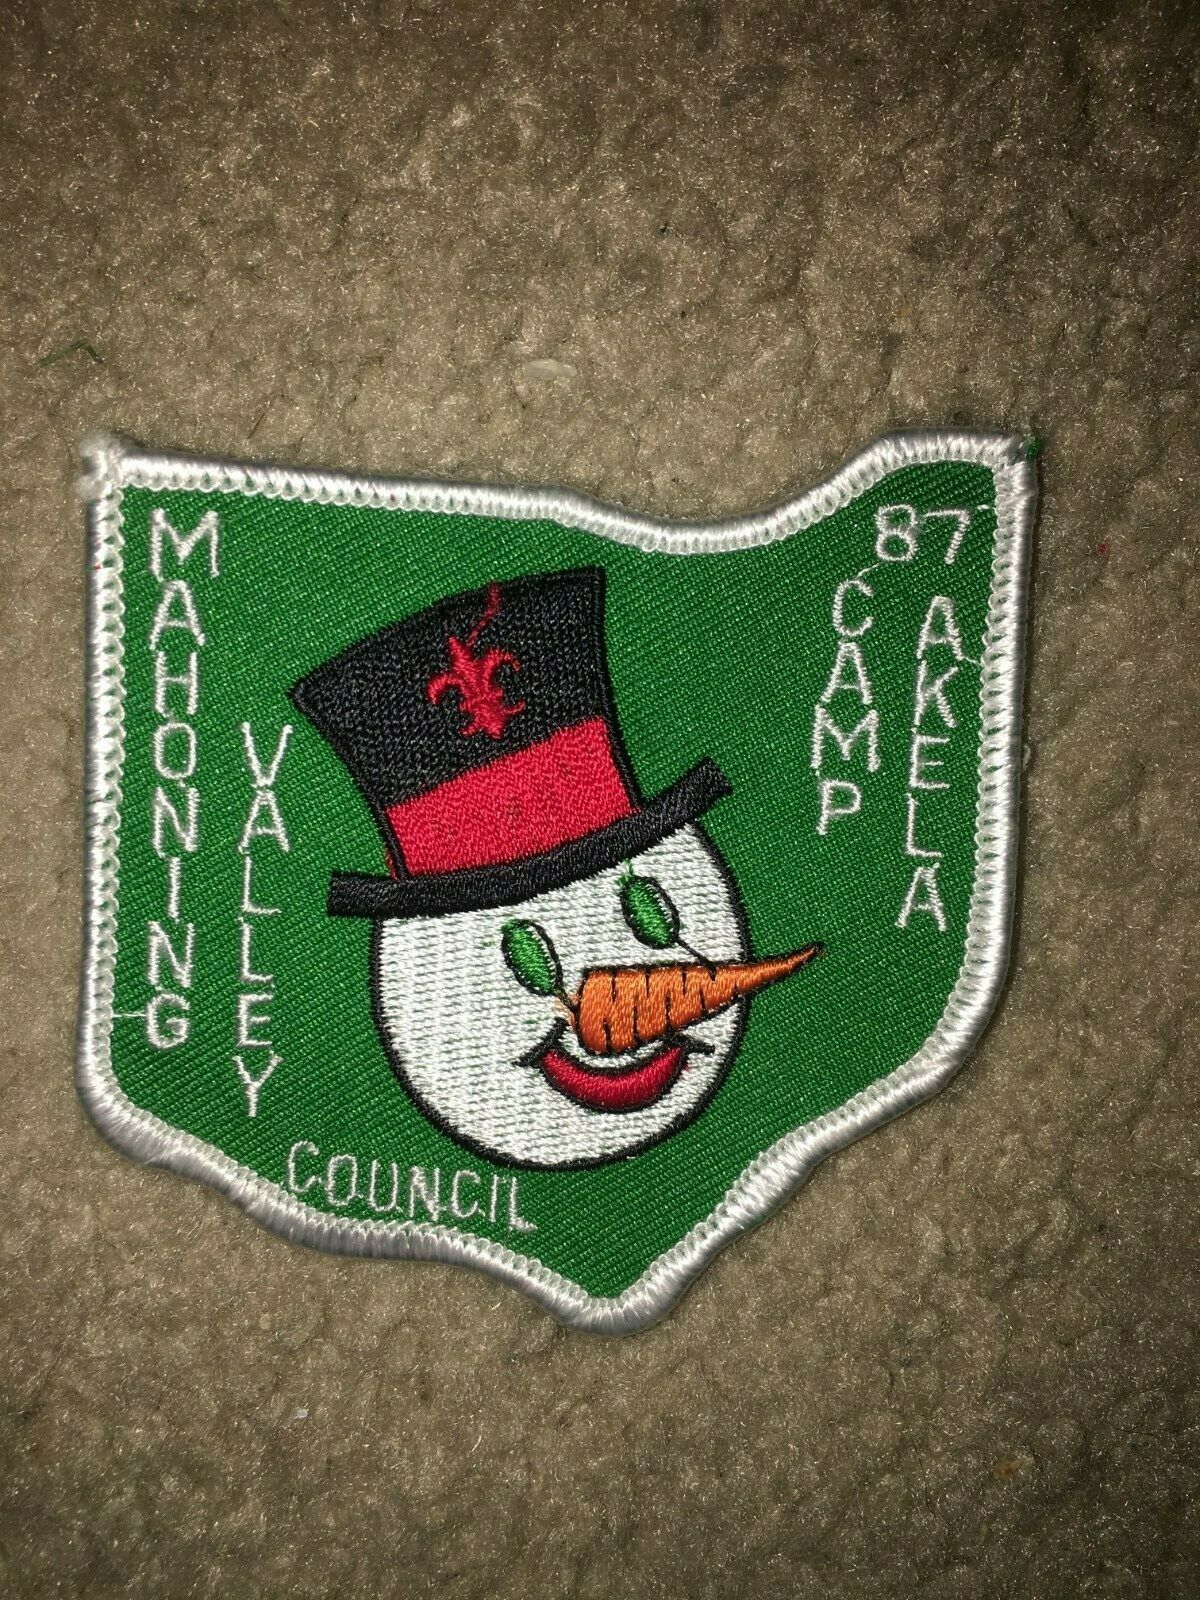 Boy Scout Bsa Mahoning Valley Camp Akela 1987 Frosty Council Ohio Shape Patch